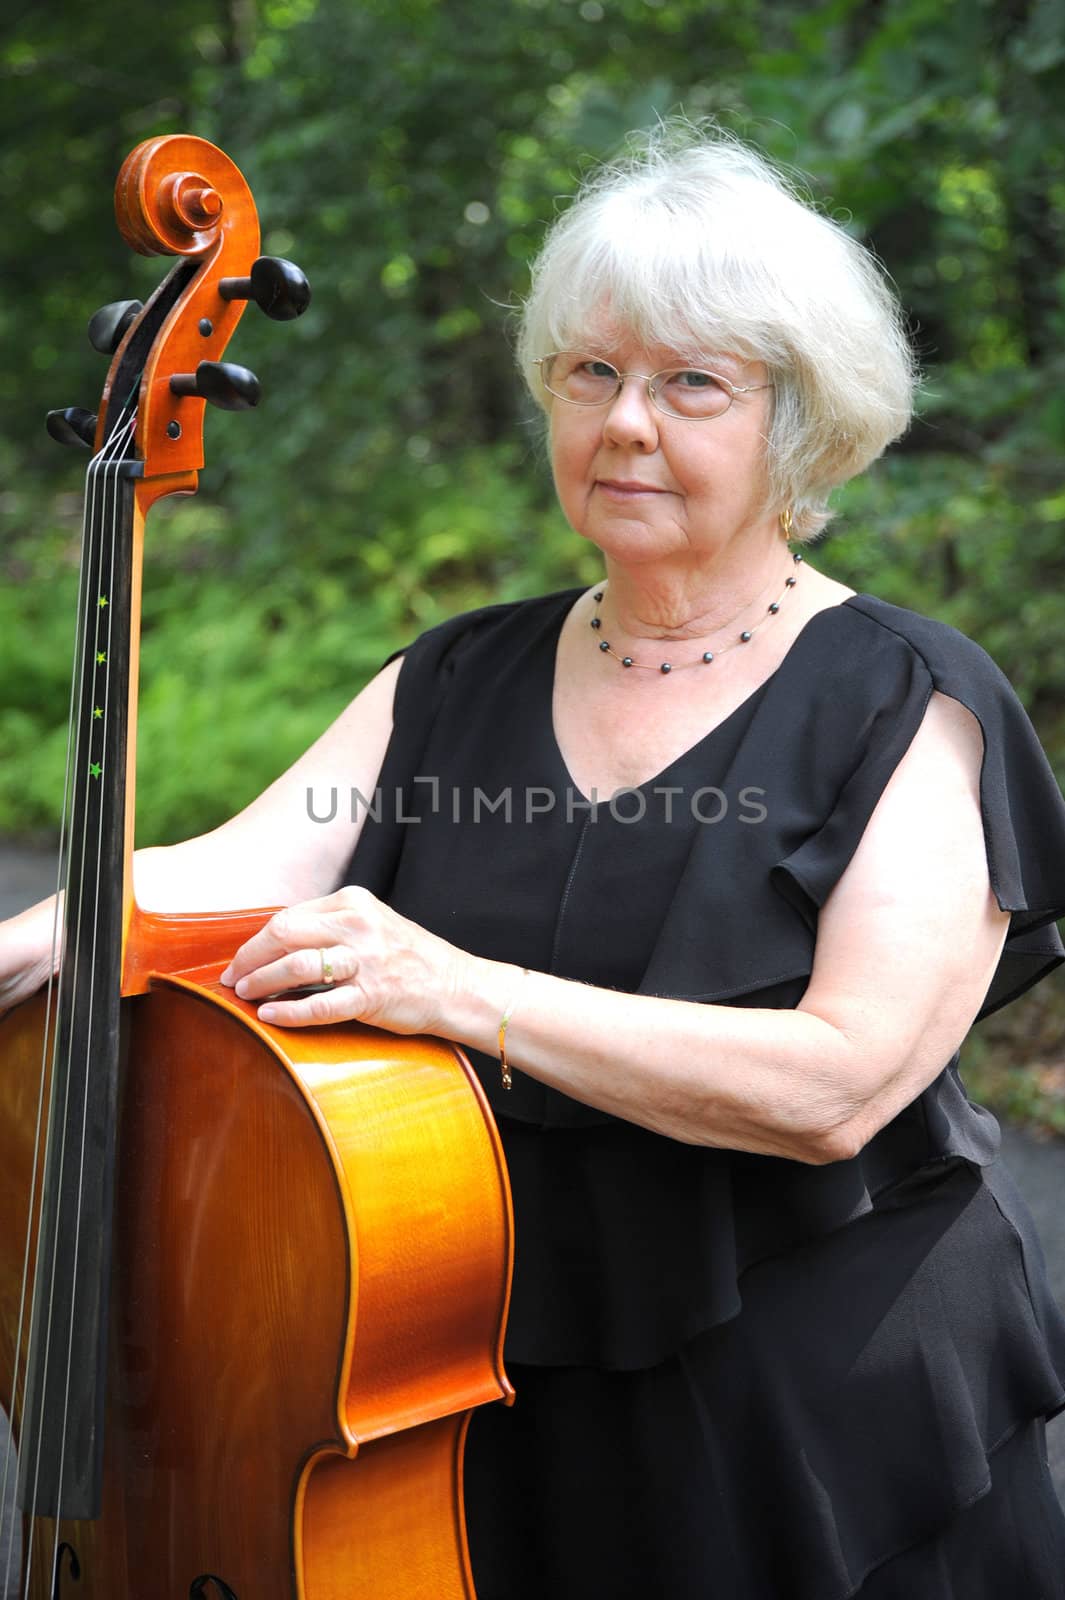 Female cellist standing with her cello.